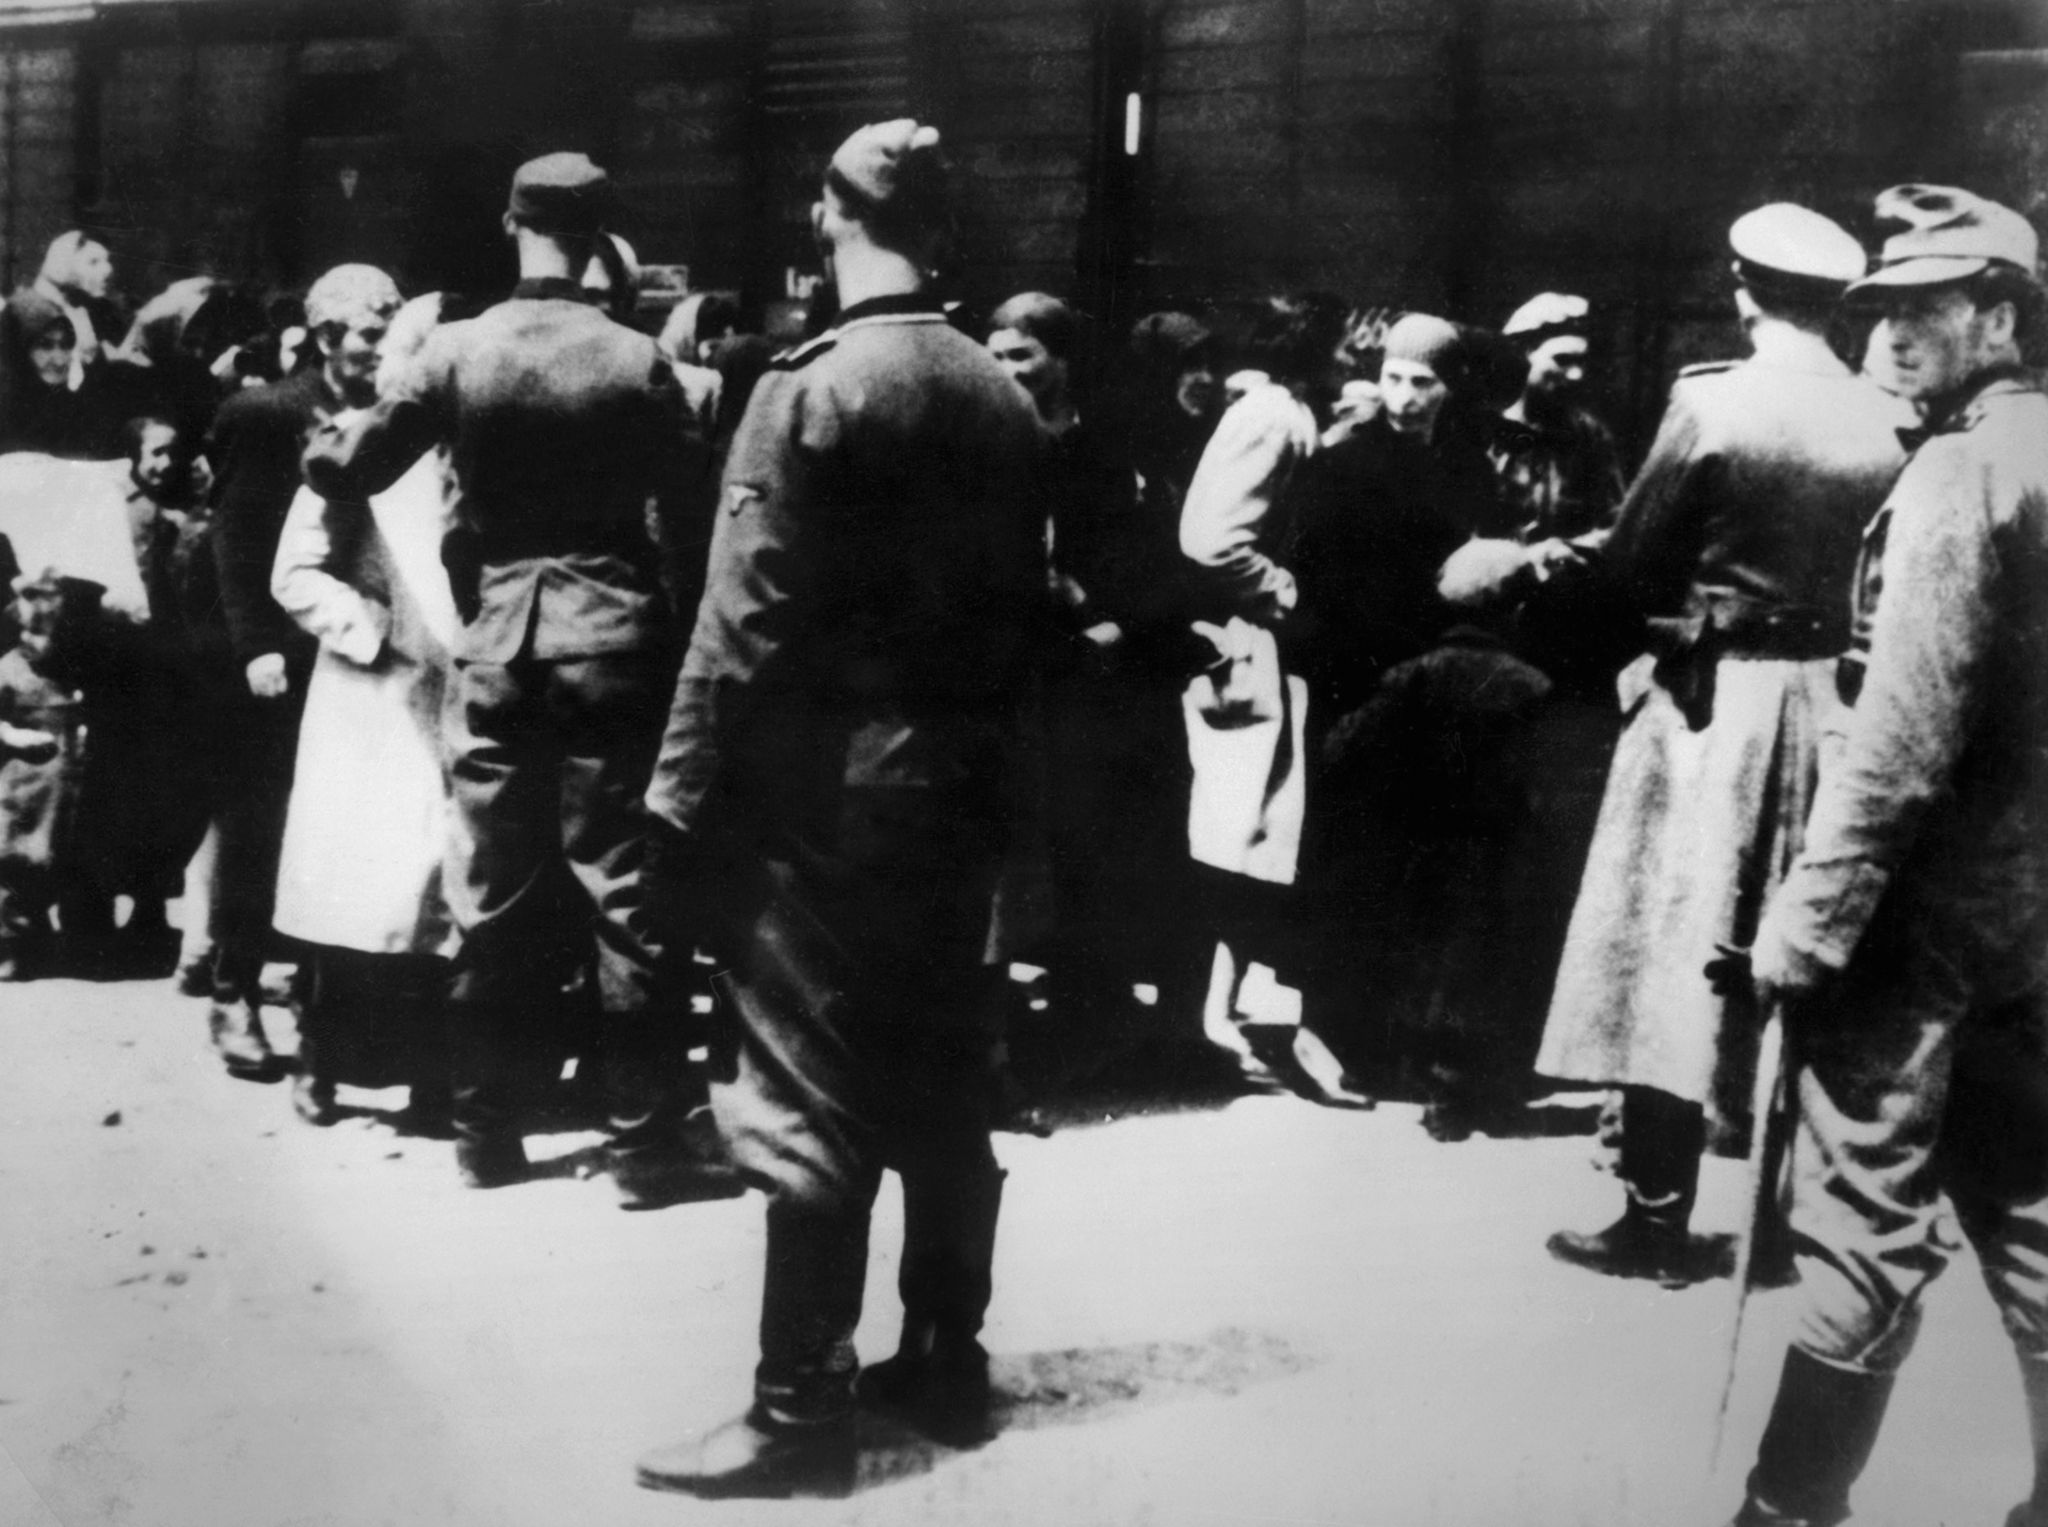 Arrival of prisoners at Auschwitz